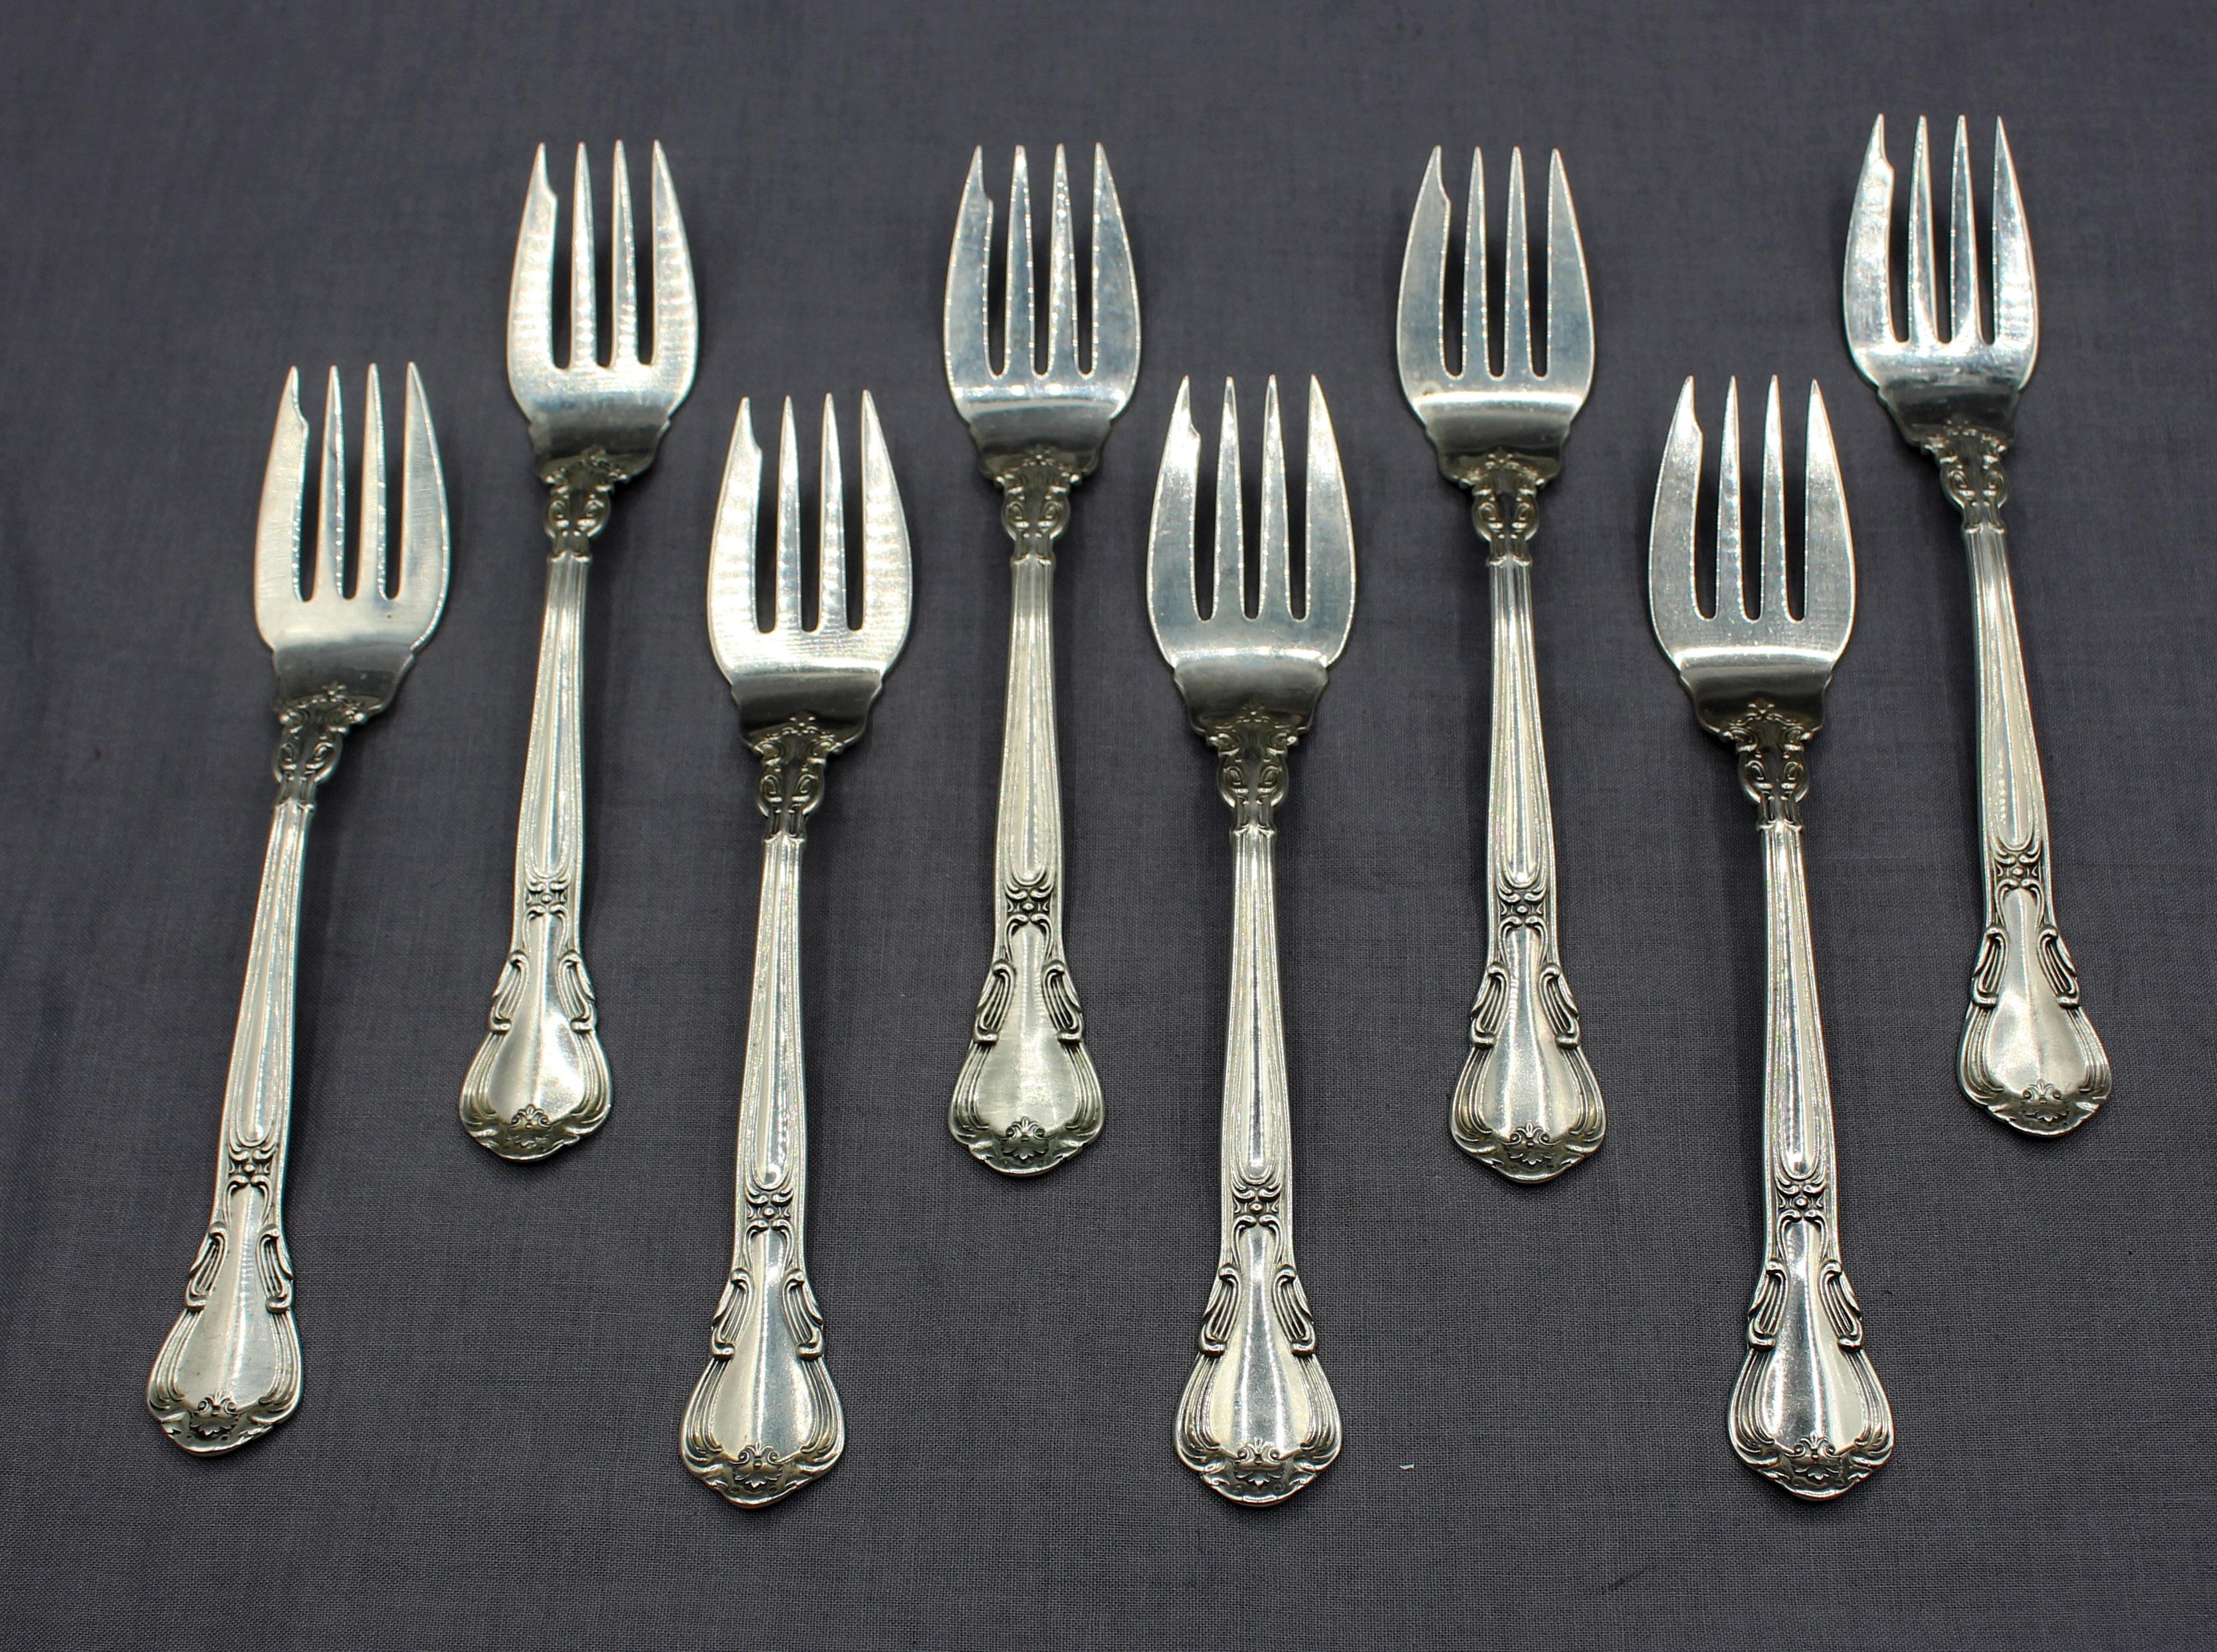 Service for 8 of Chantilly pattern sterling silver flatware by Gorham, c.1950s. Never monogrammed. 32 pieces: 8 place knives (9.25